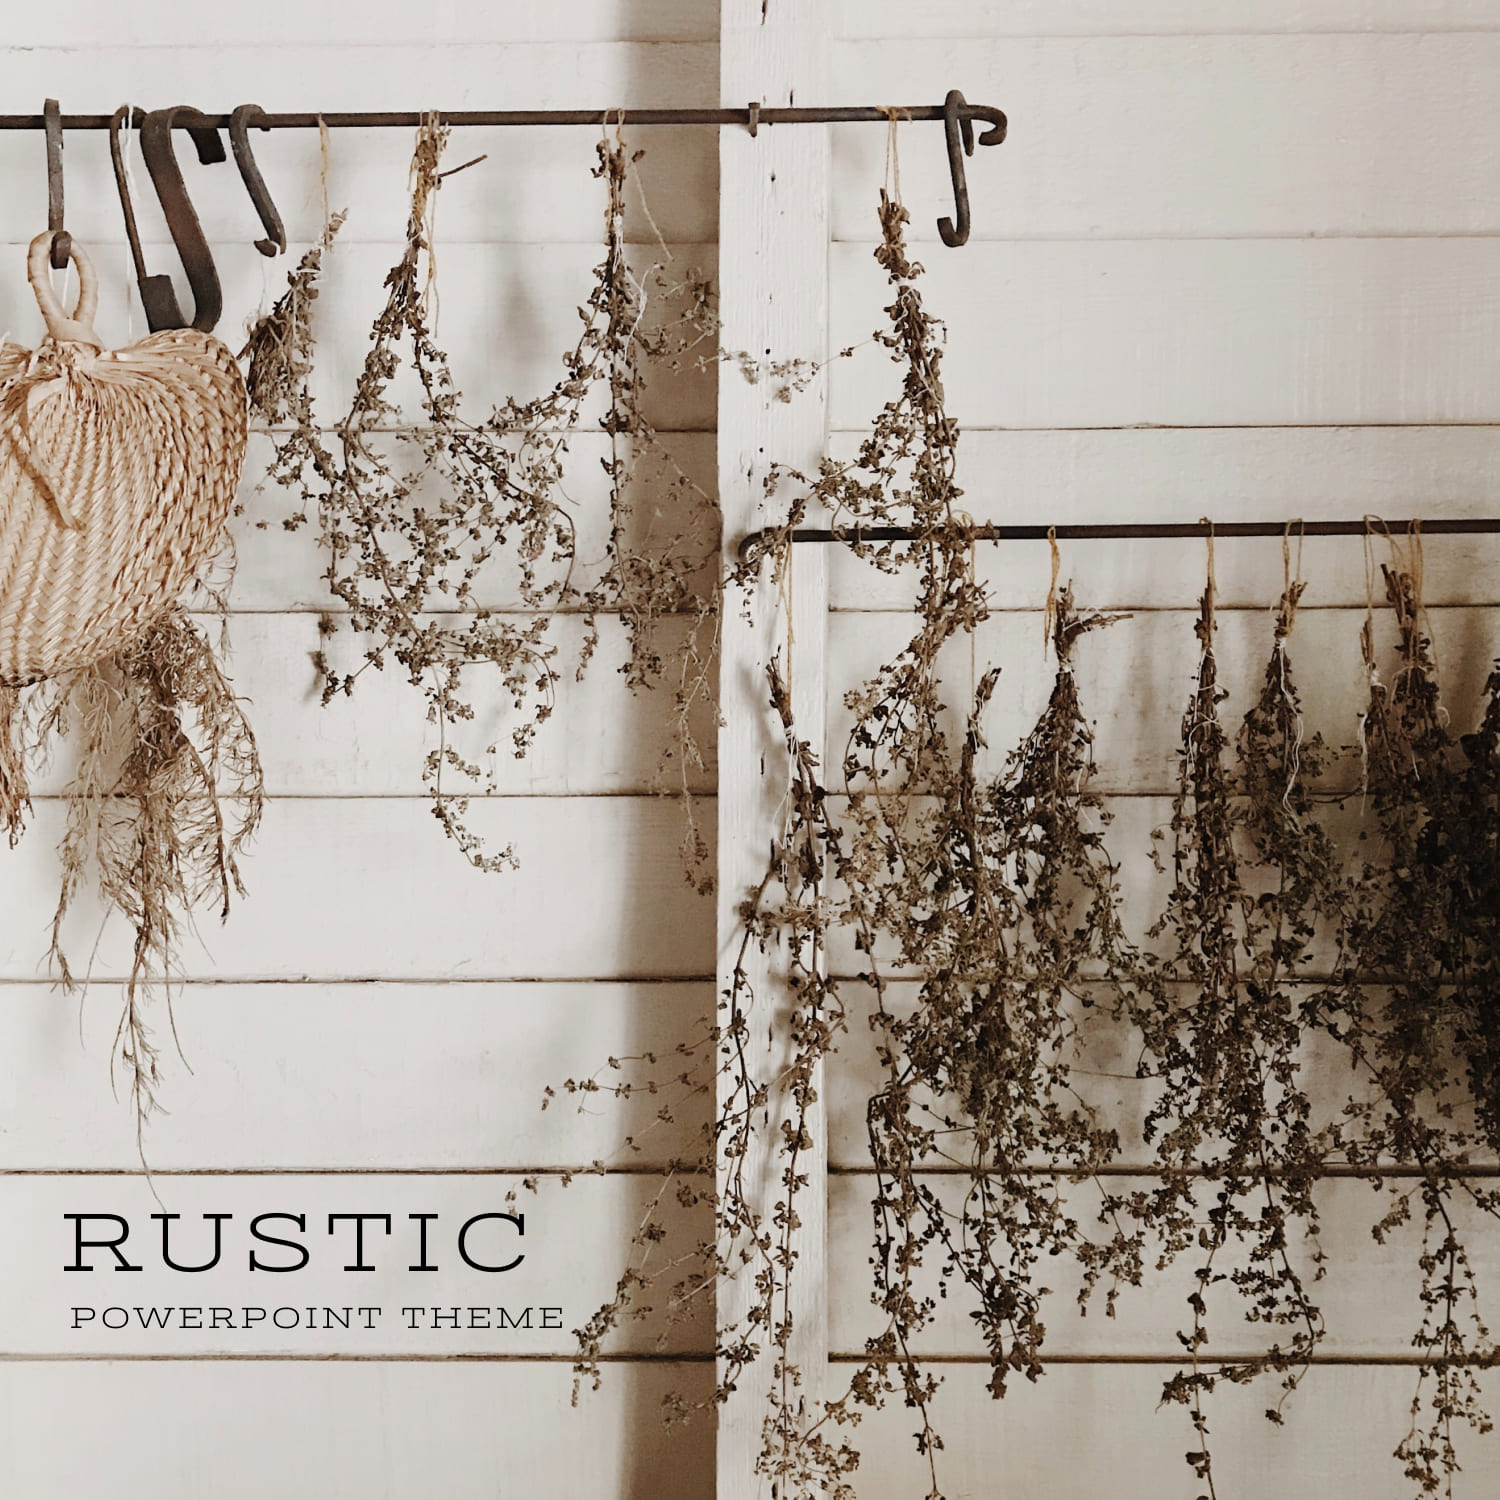 Rustic Powerpoint Theme cover image.